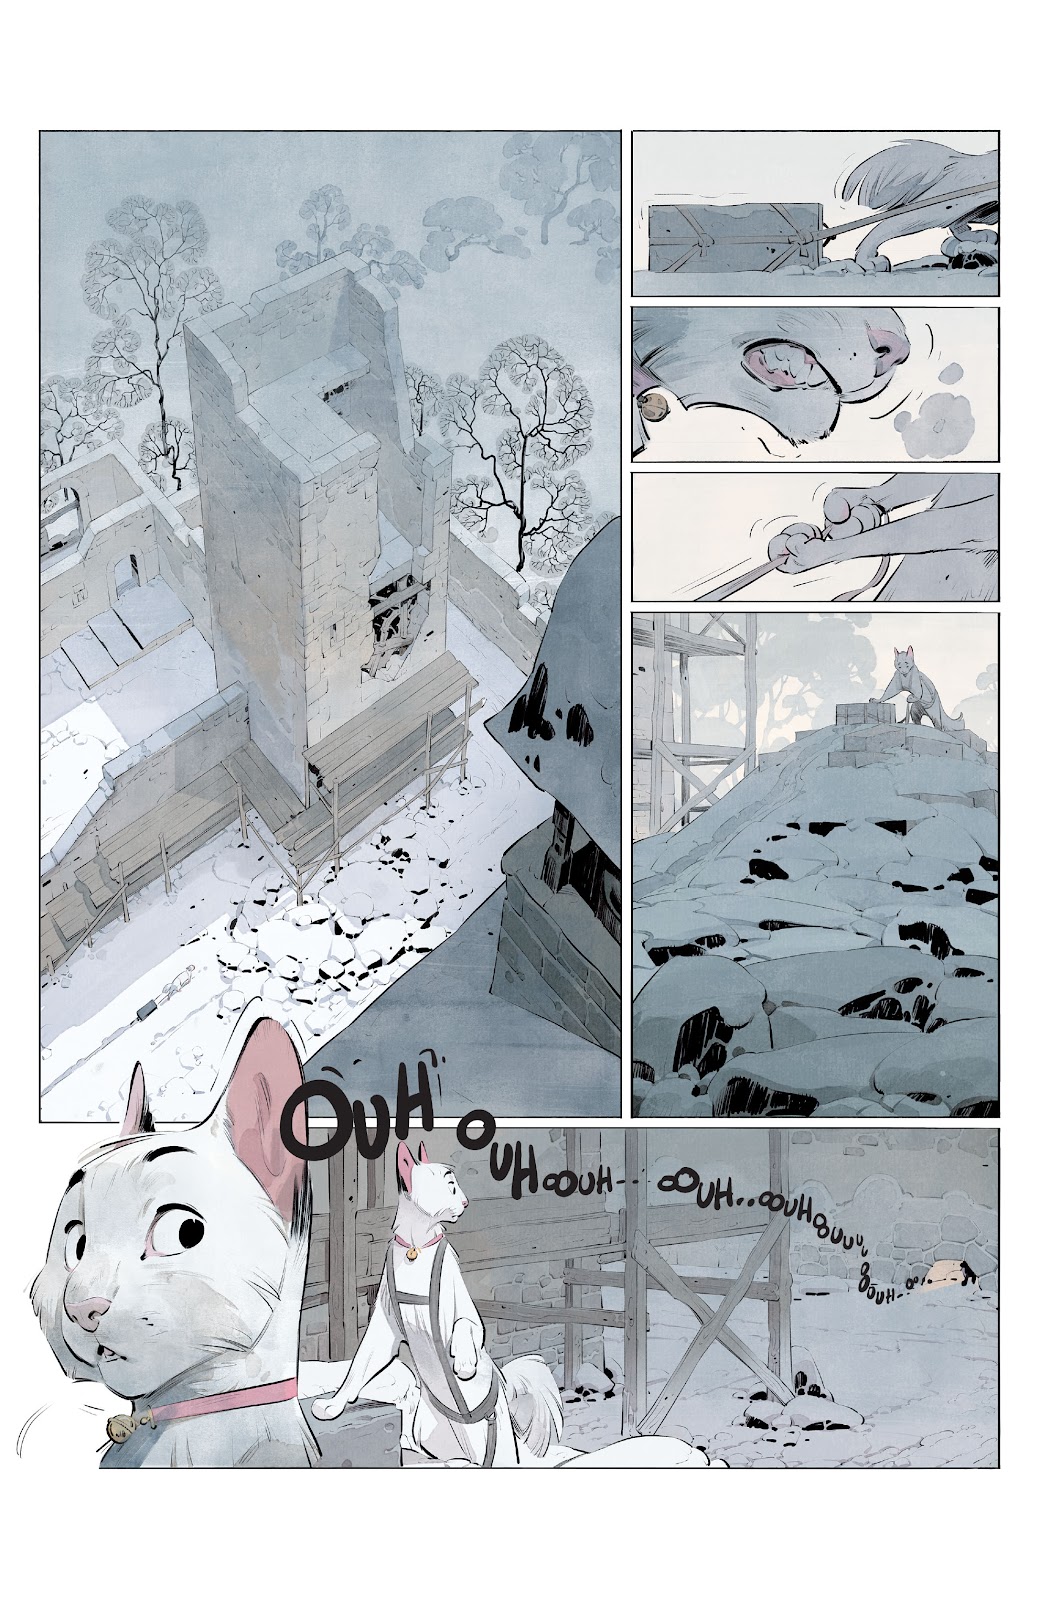 Animal Castle Vol. 2 issue 1 - Page 9